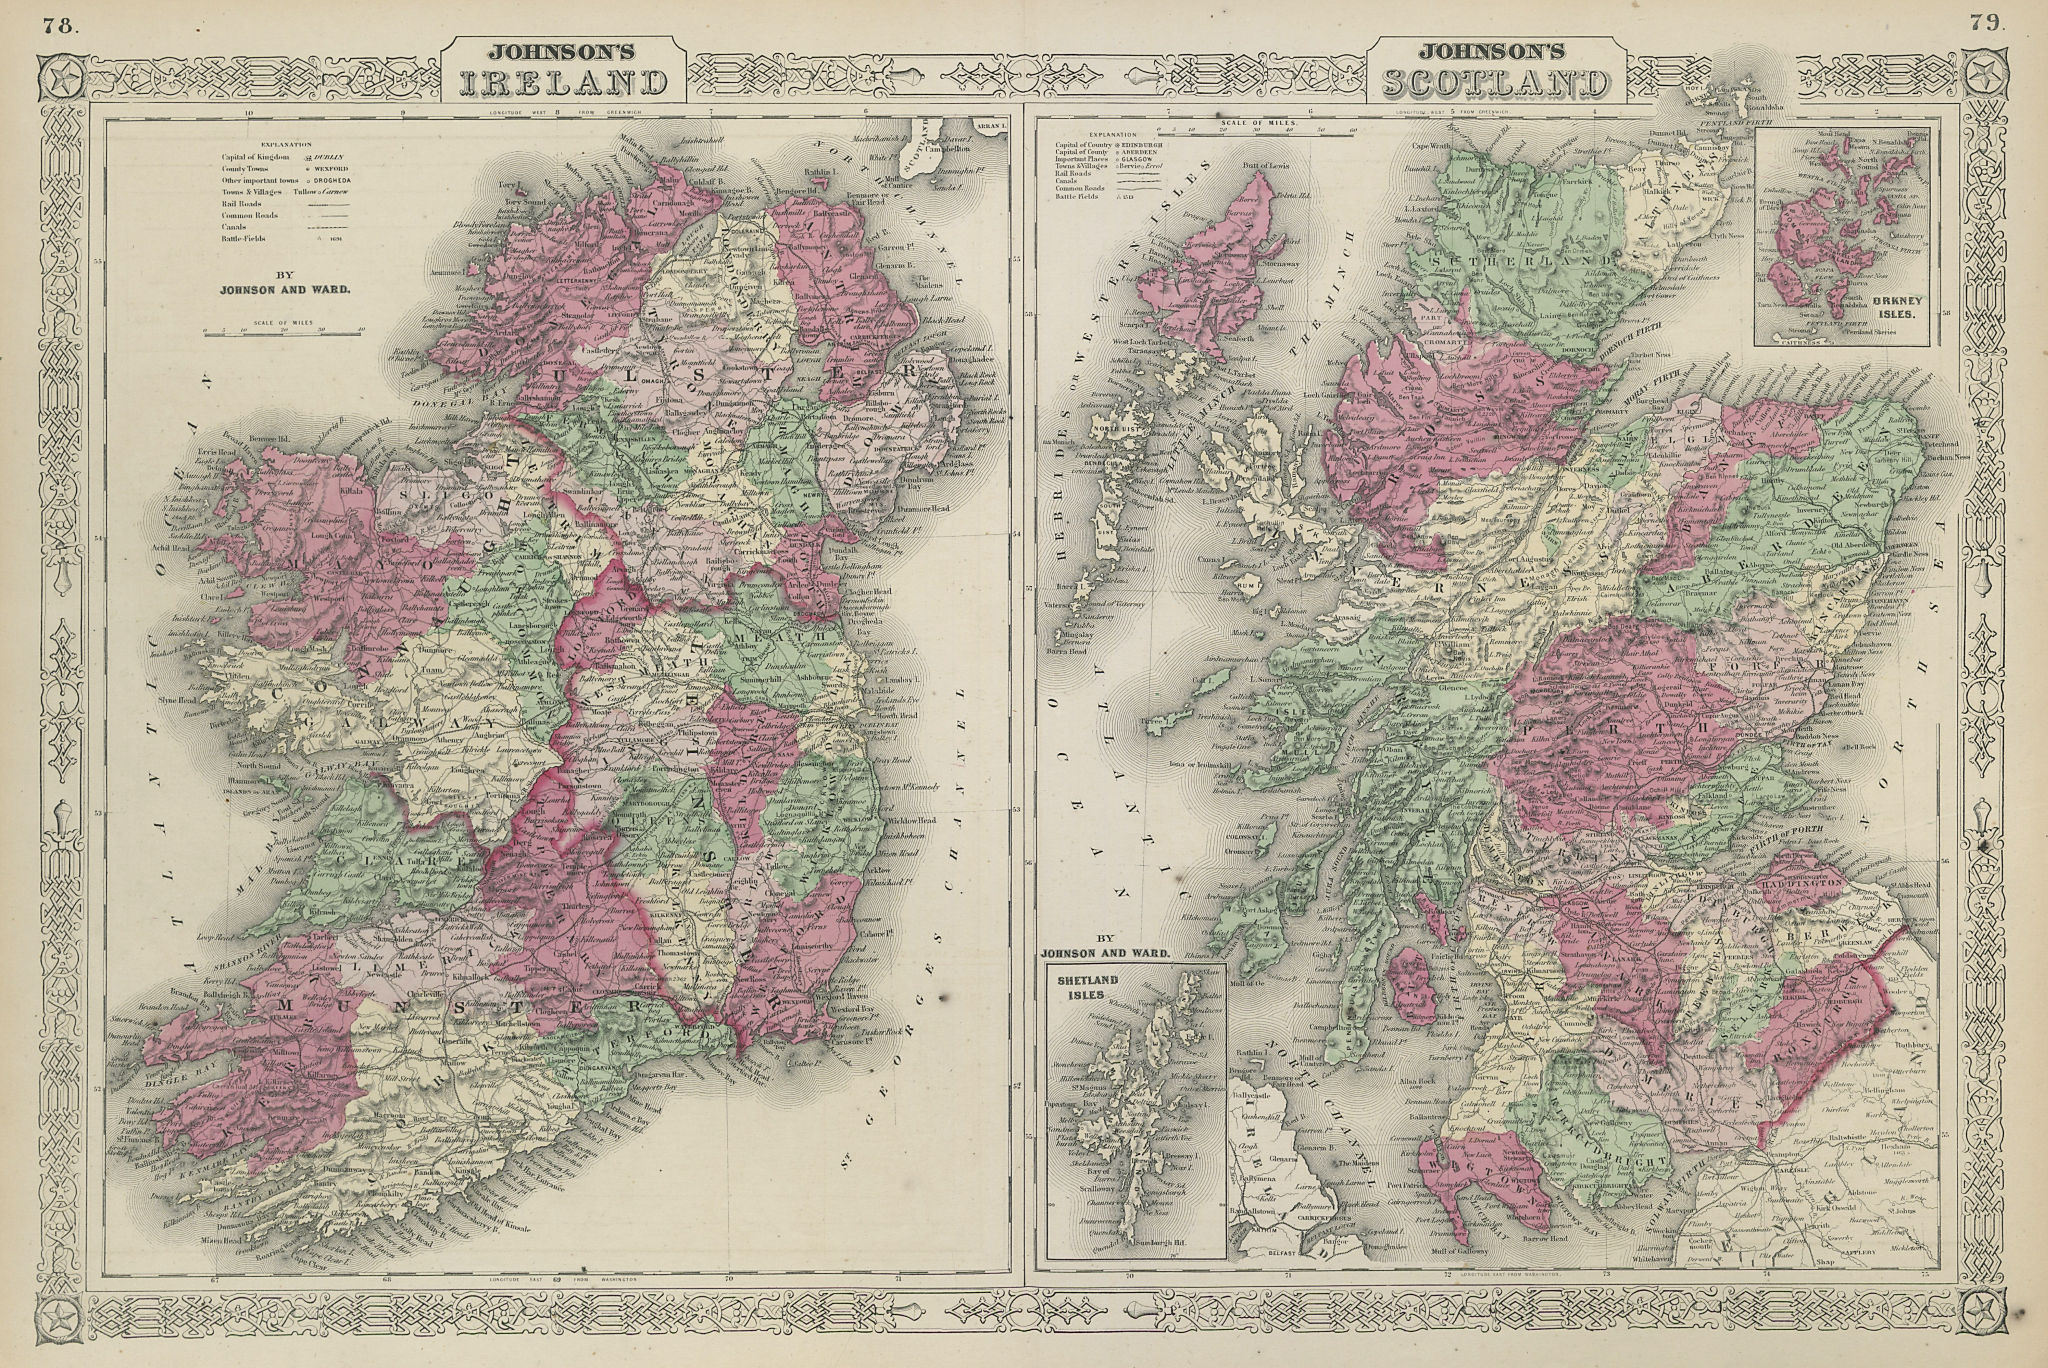 Associate Product Johnson's Ireland & Johnson's Scotland showing counties 1865 old antique map